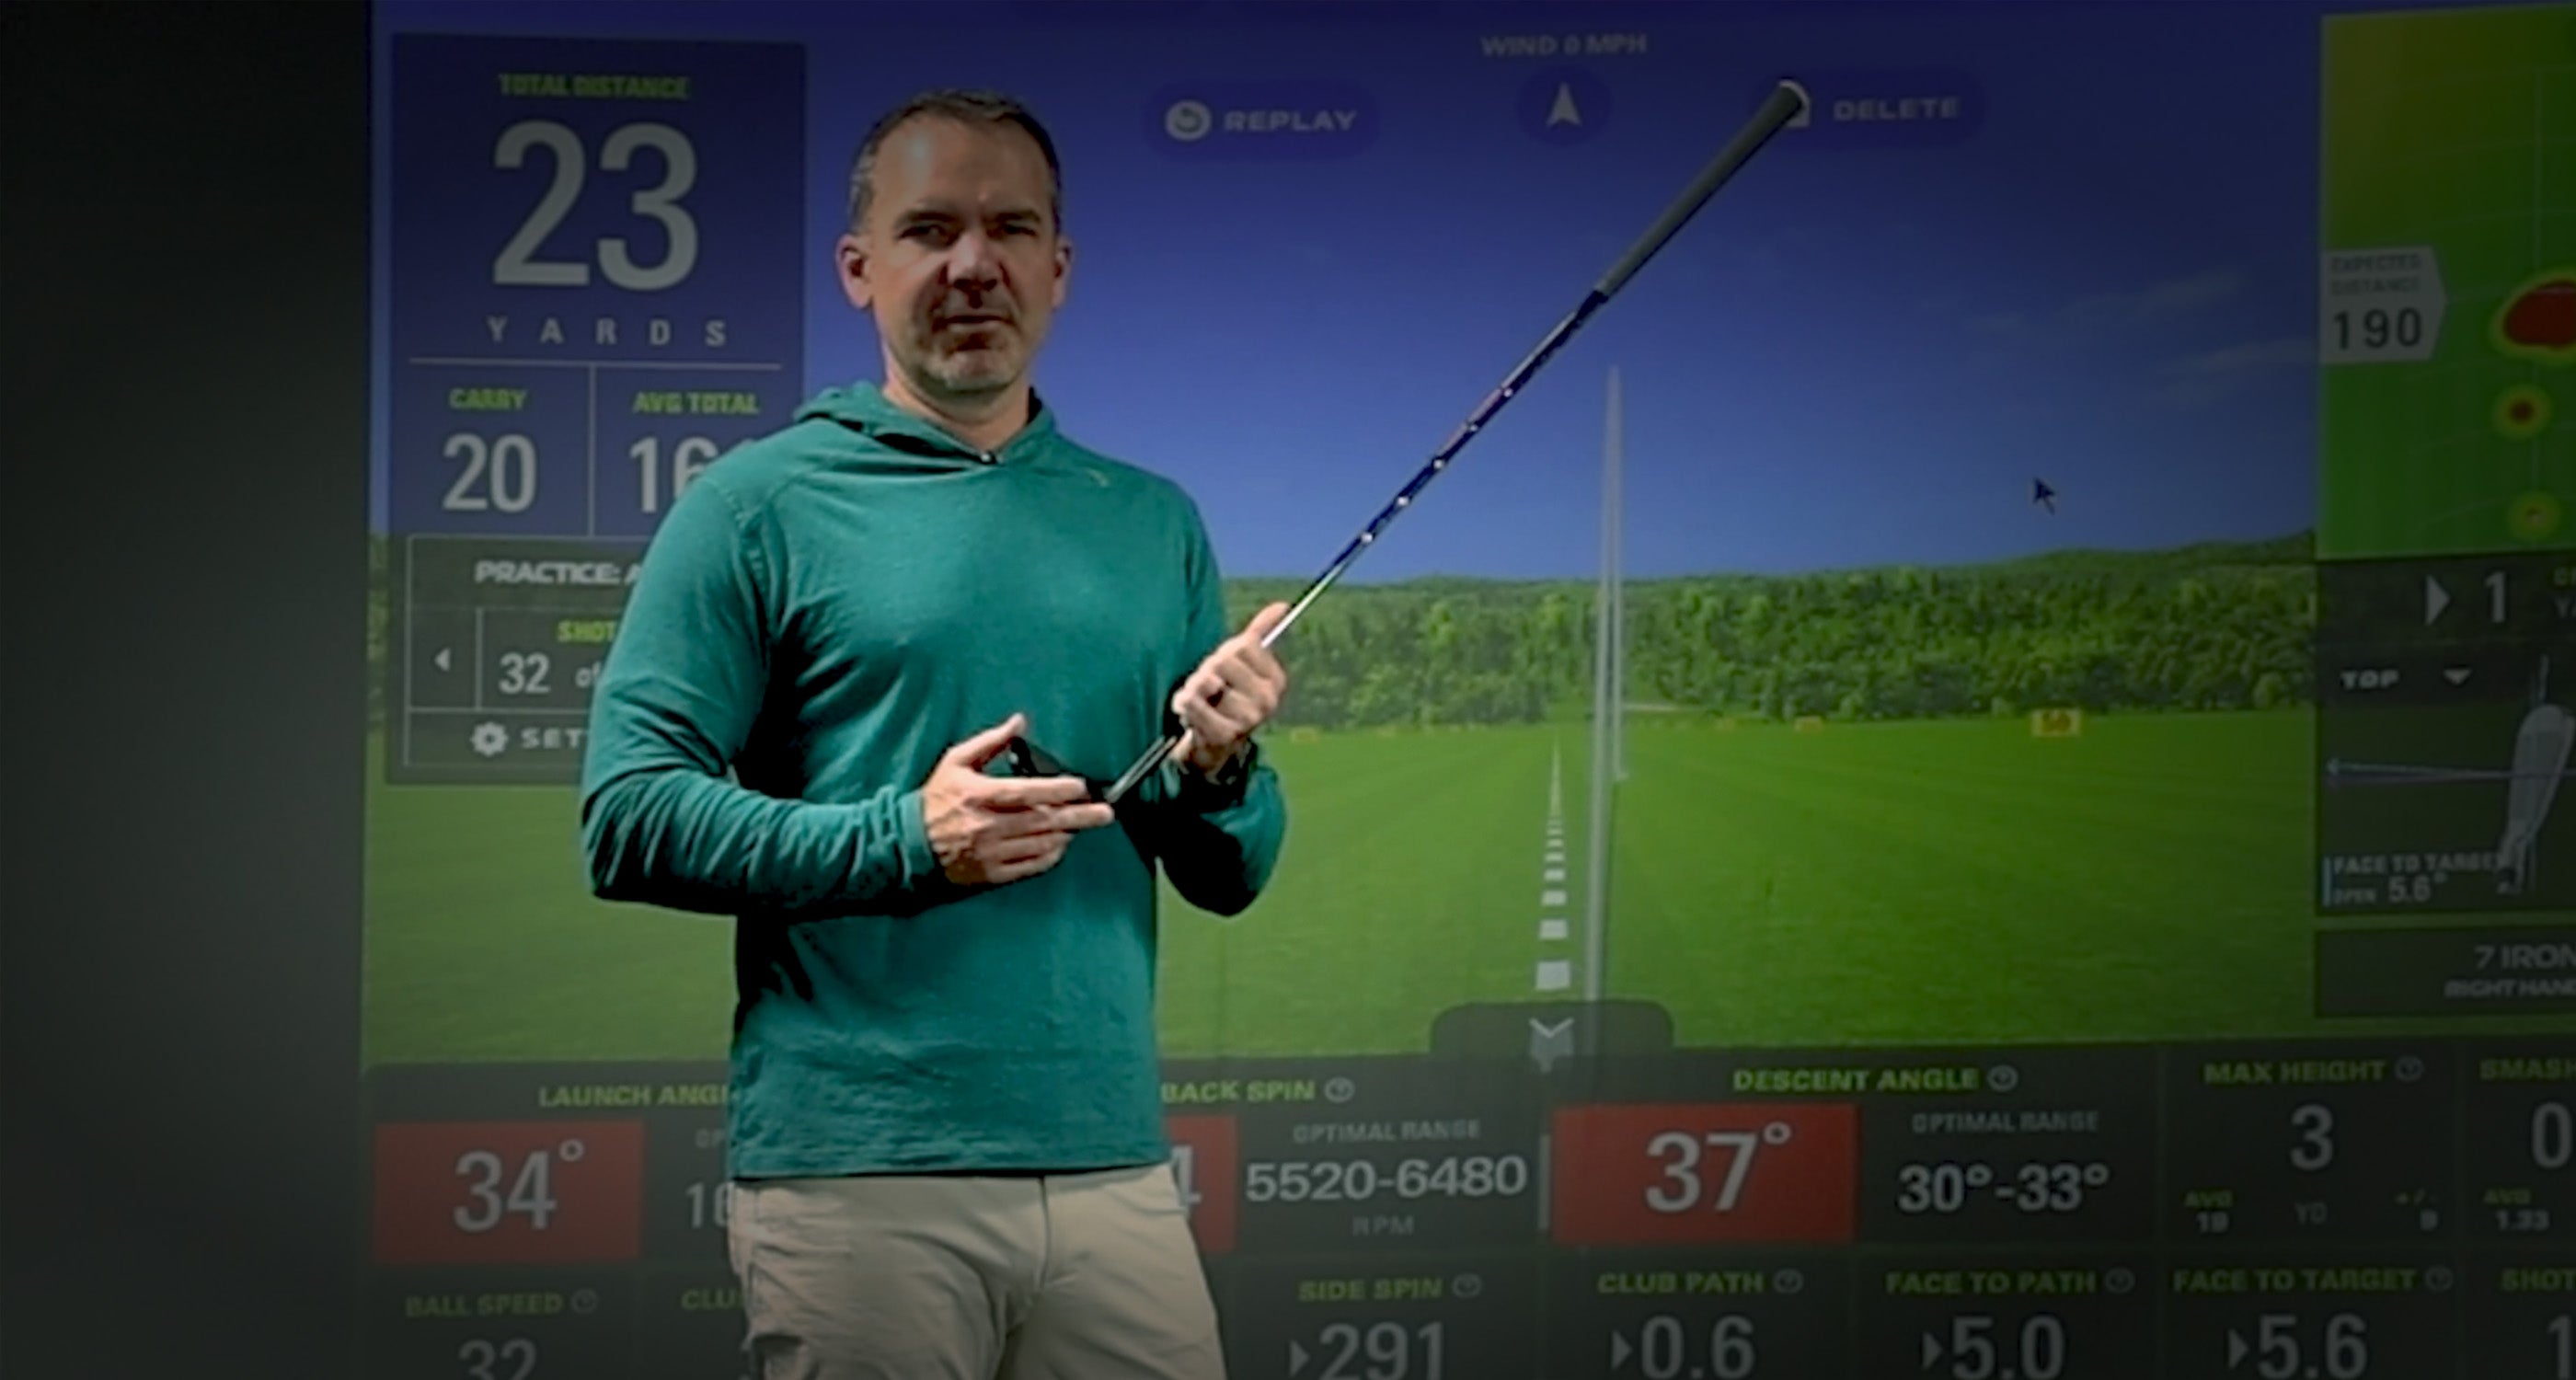 Nick Clearwater talking about the SKYTRAK plus launch monitor and golf sim